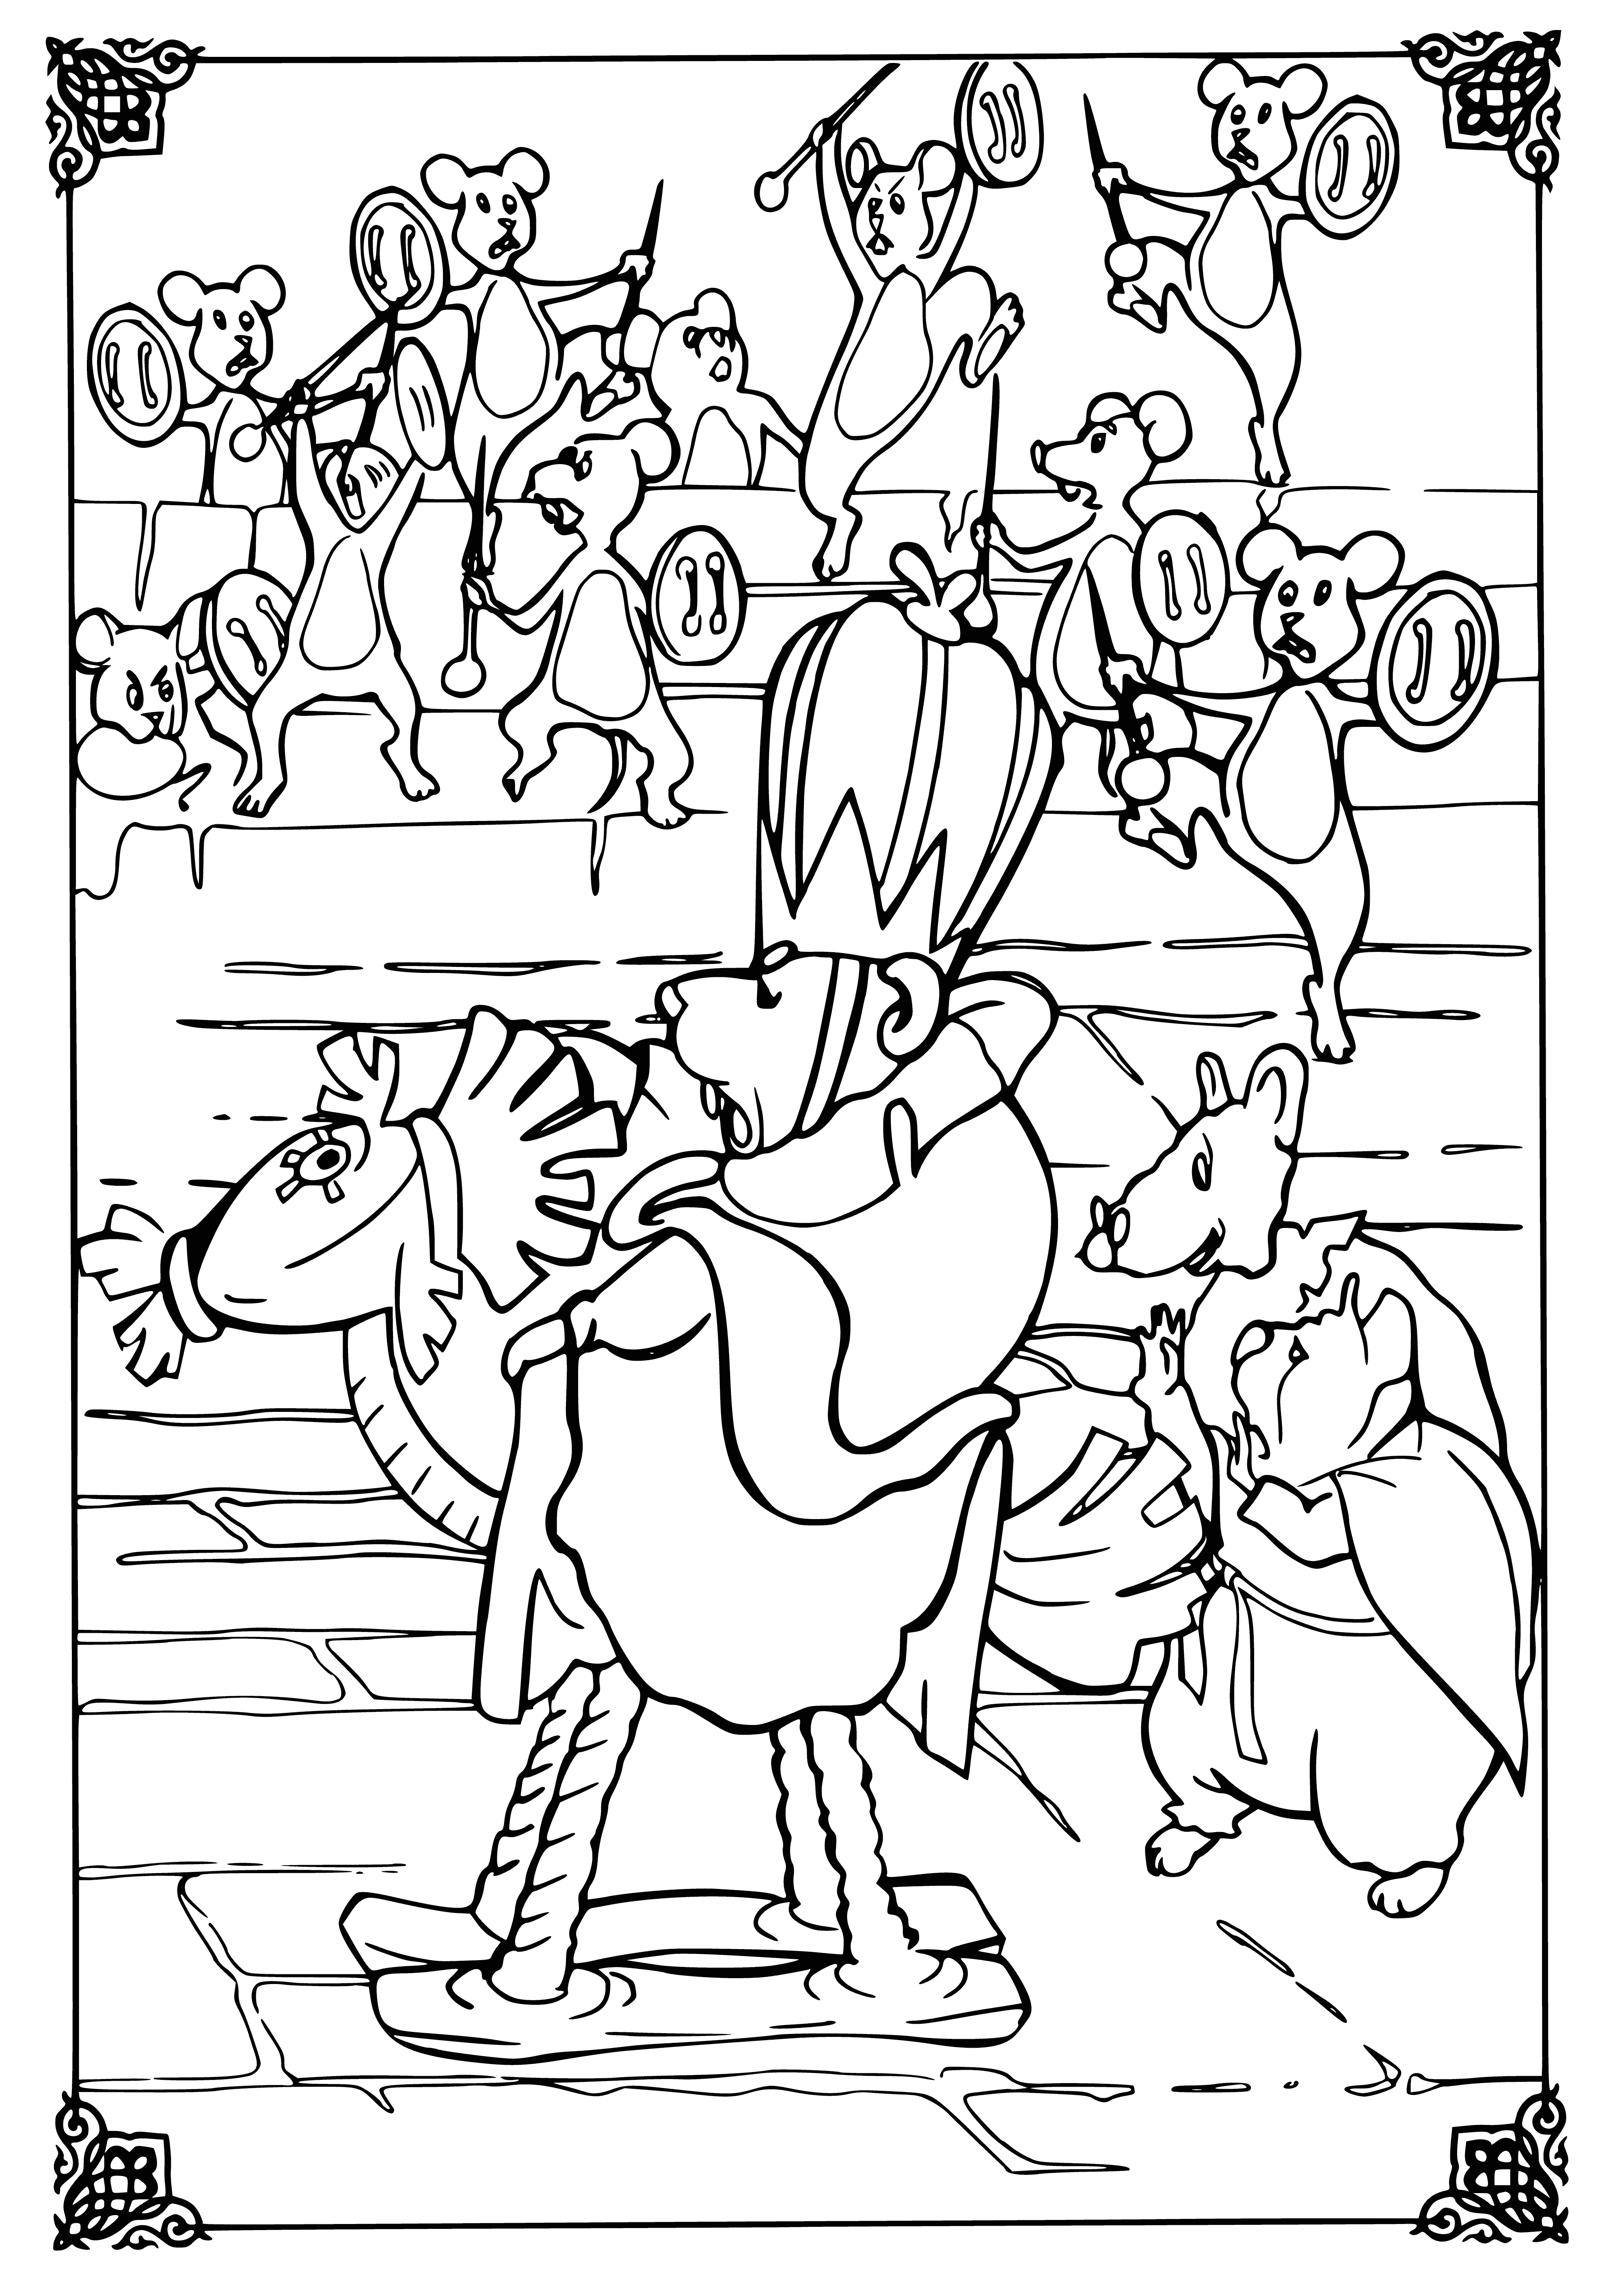 coloring page: Mouse King's army of mice dress in brown & gray, have pointy hats & swords. They stand on crates in background & face castle. #Nutcracker